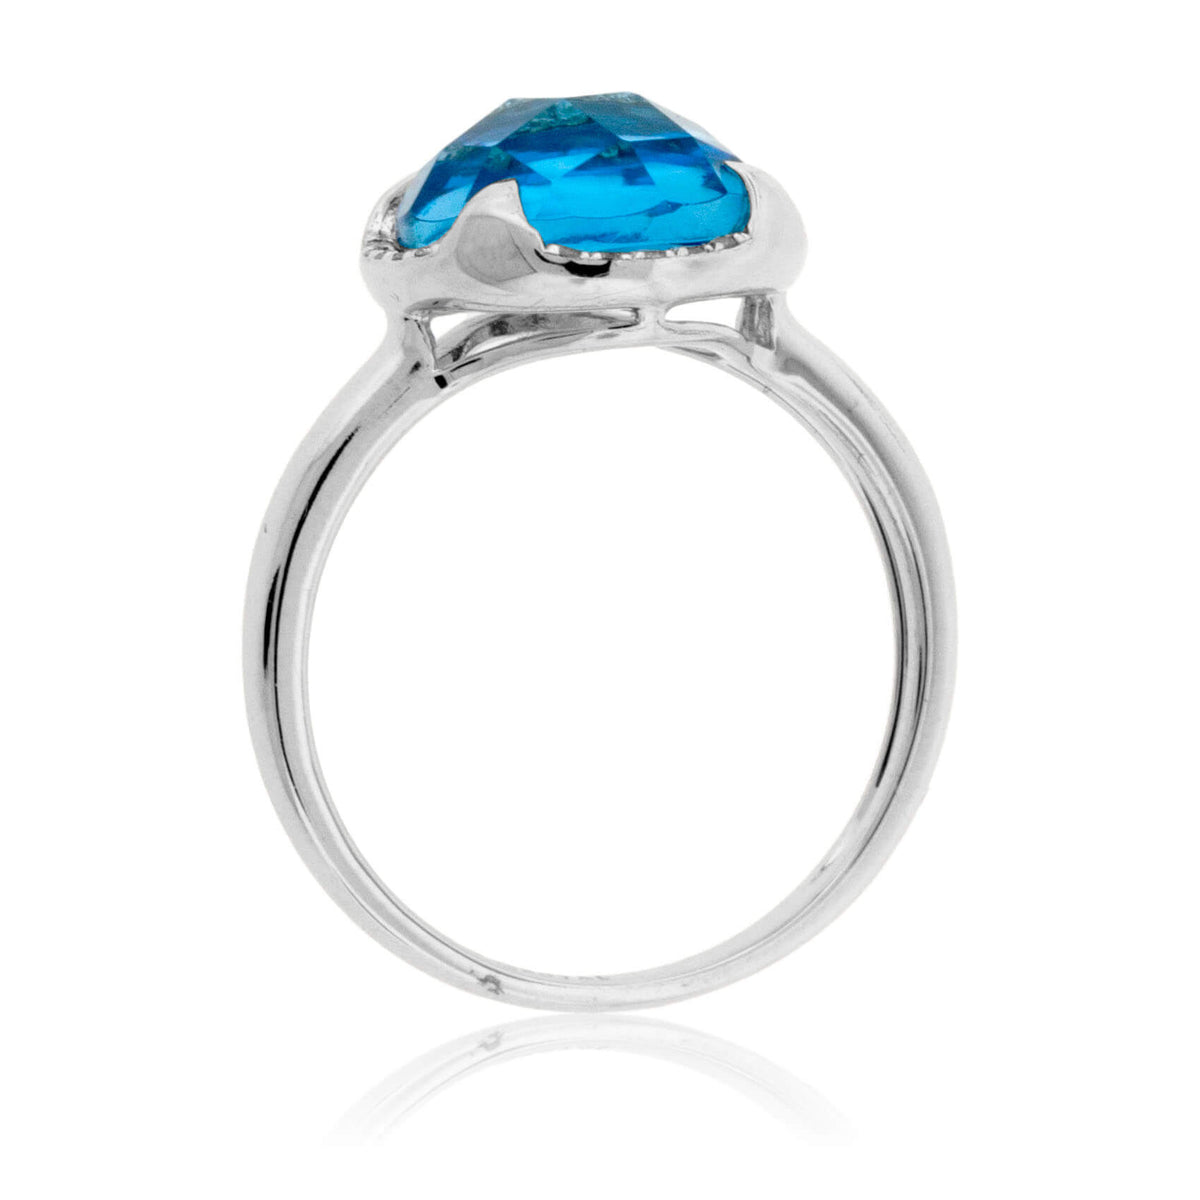 Fancy Round Cut Blue Topaz and Diamond Halo Ring - Park City Jewelers